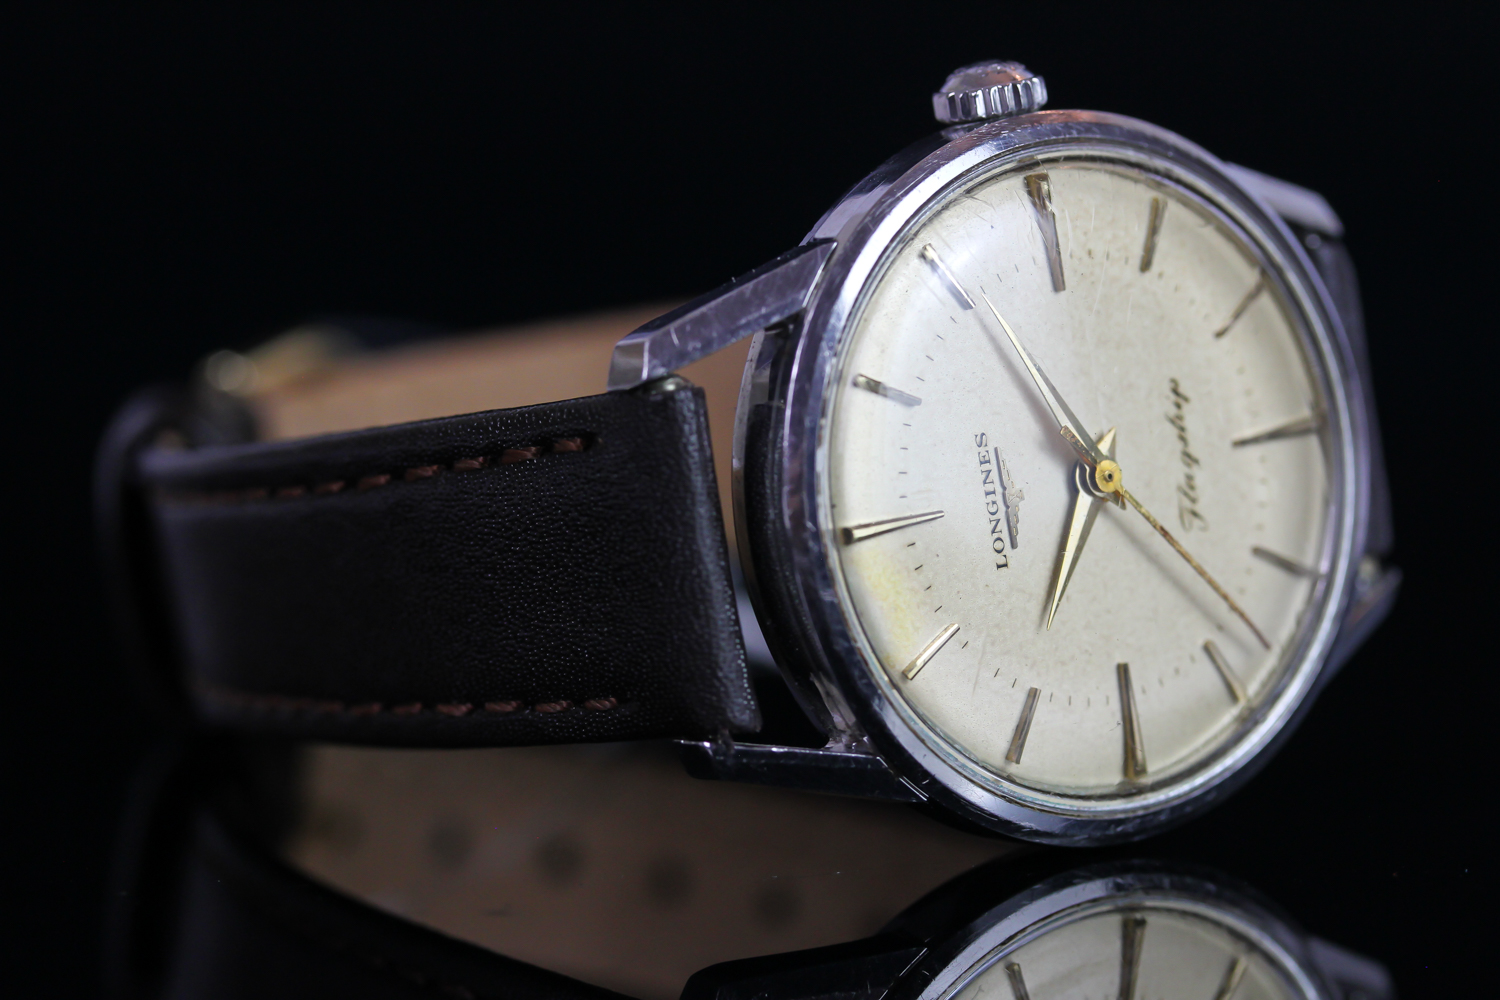 GENTLEMENS LONGINES FLAGSHIP VINTAGE WRISTWATCH, circular patina cream dial with gold hour markers - Image 2 of 6